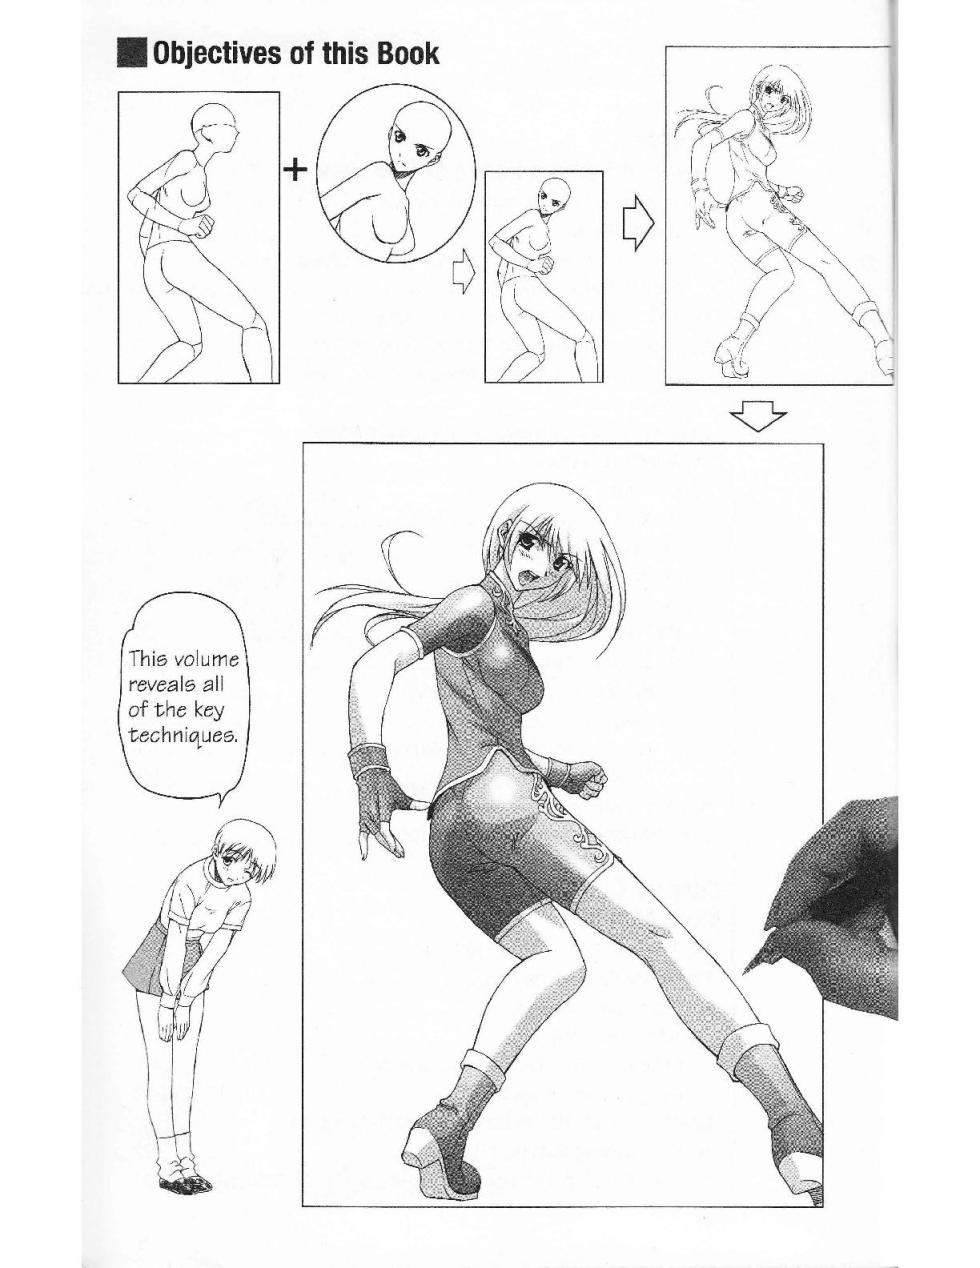 More How to Draw Manga Vol. 3 - Enhancing a Character's Sense of Presence - Page 8